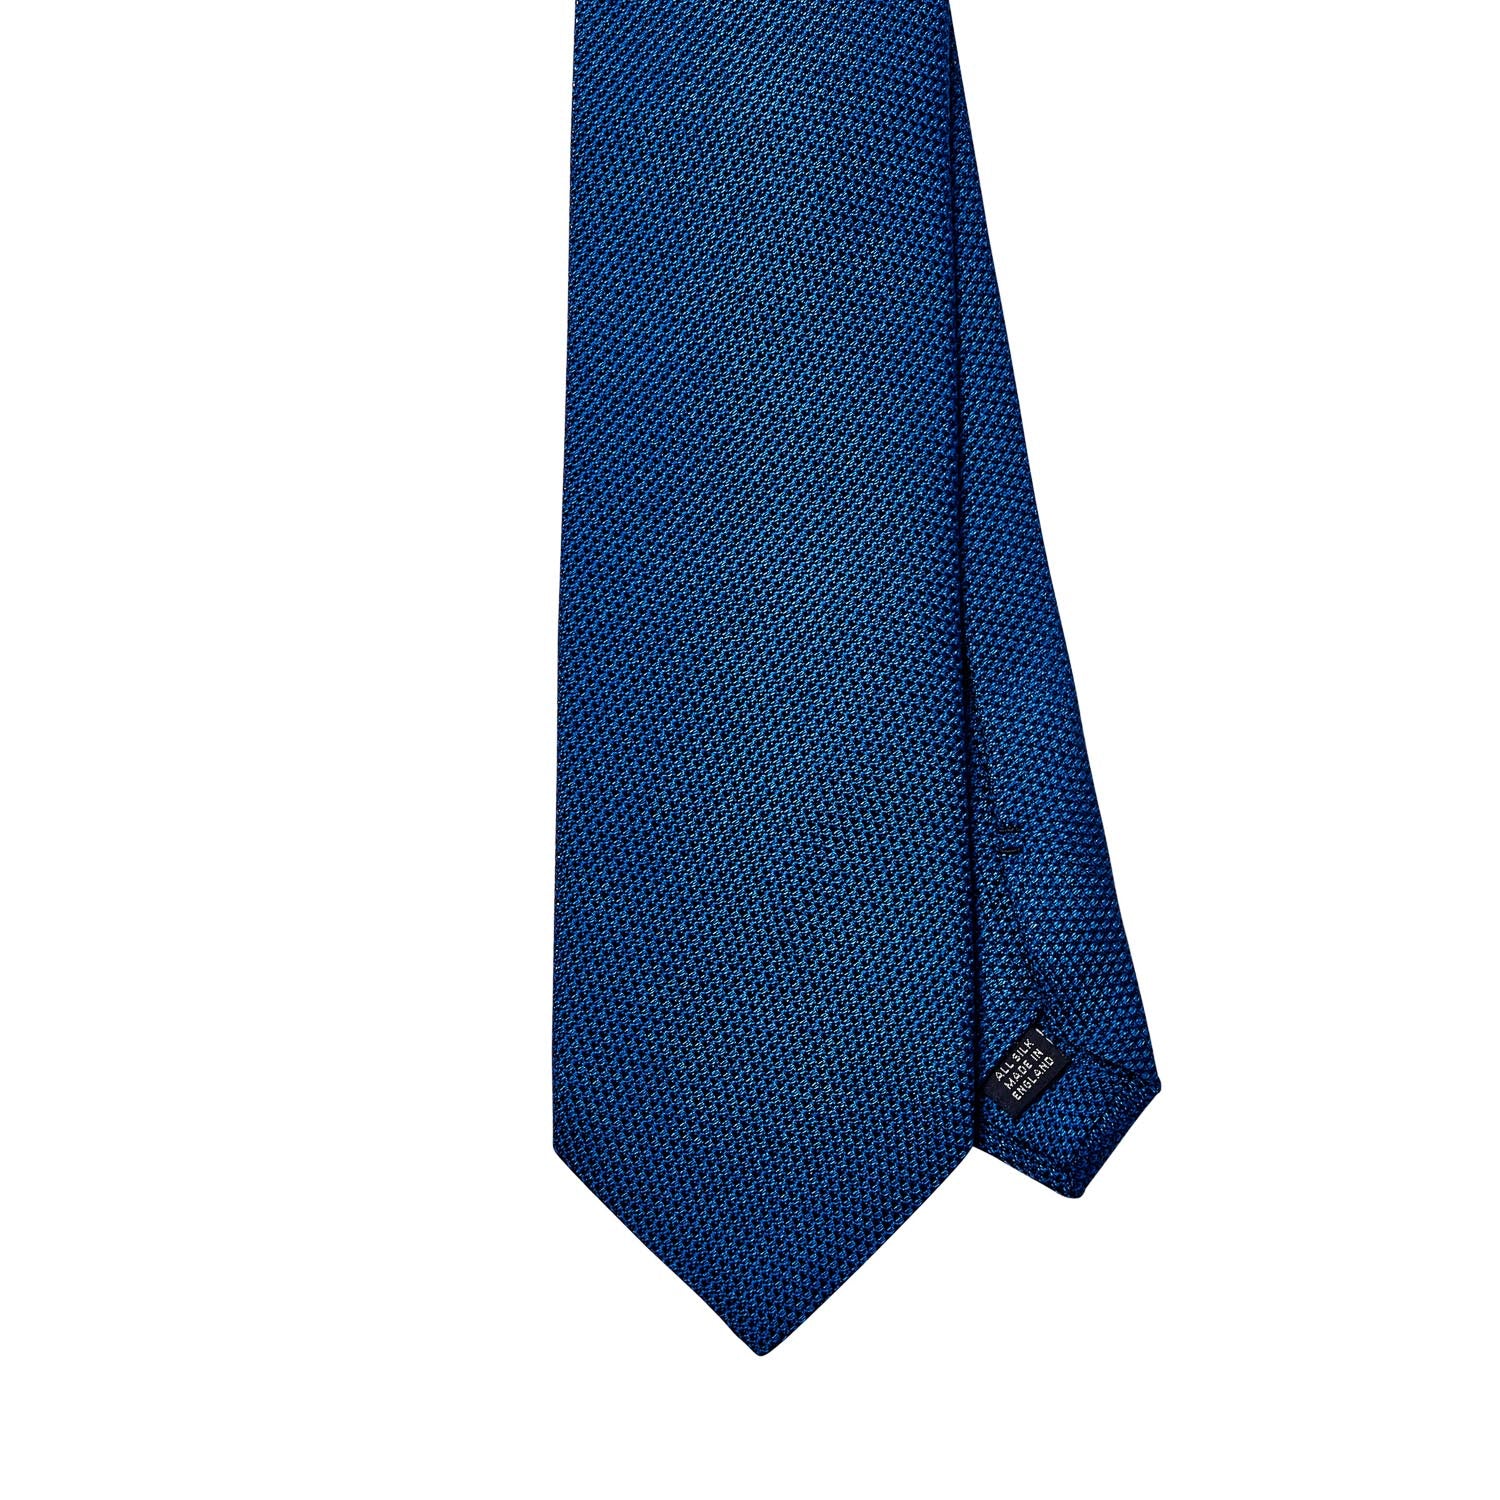 Handmade KirbyAllison.com Sovereign Grade Grenadine Fina Bright Blue Tie in the United Kingdom, featuring a blue tie on a white background.